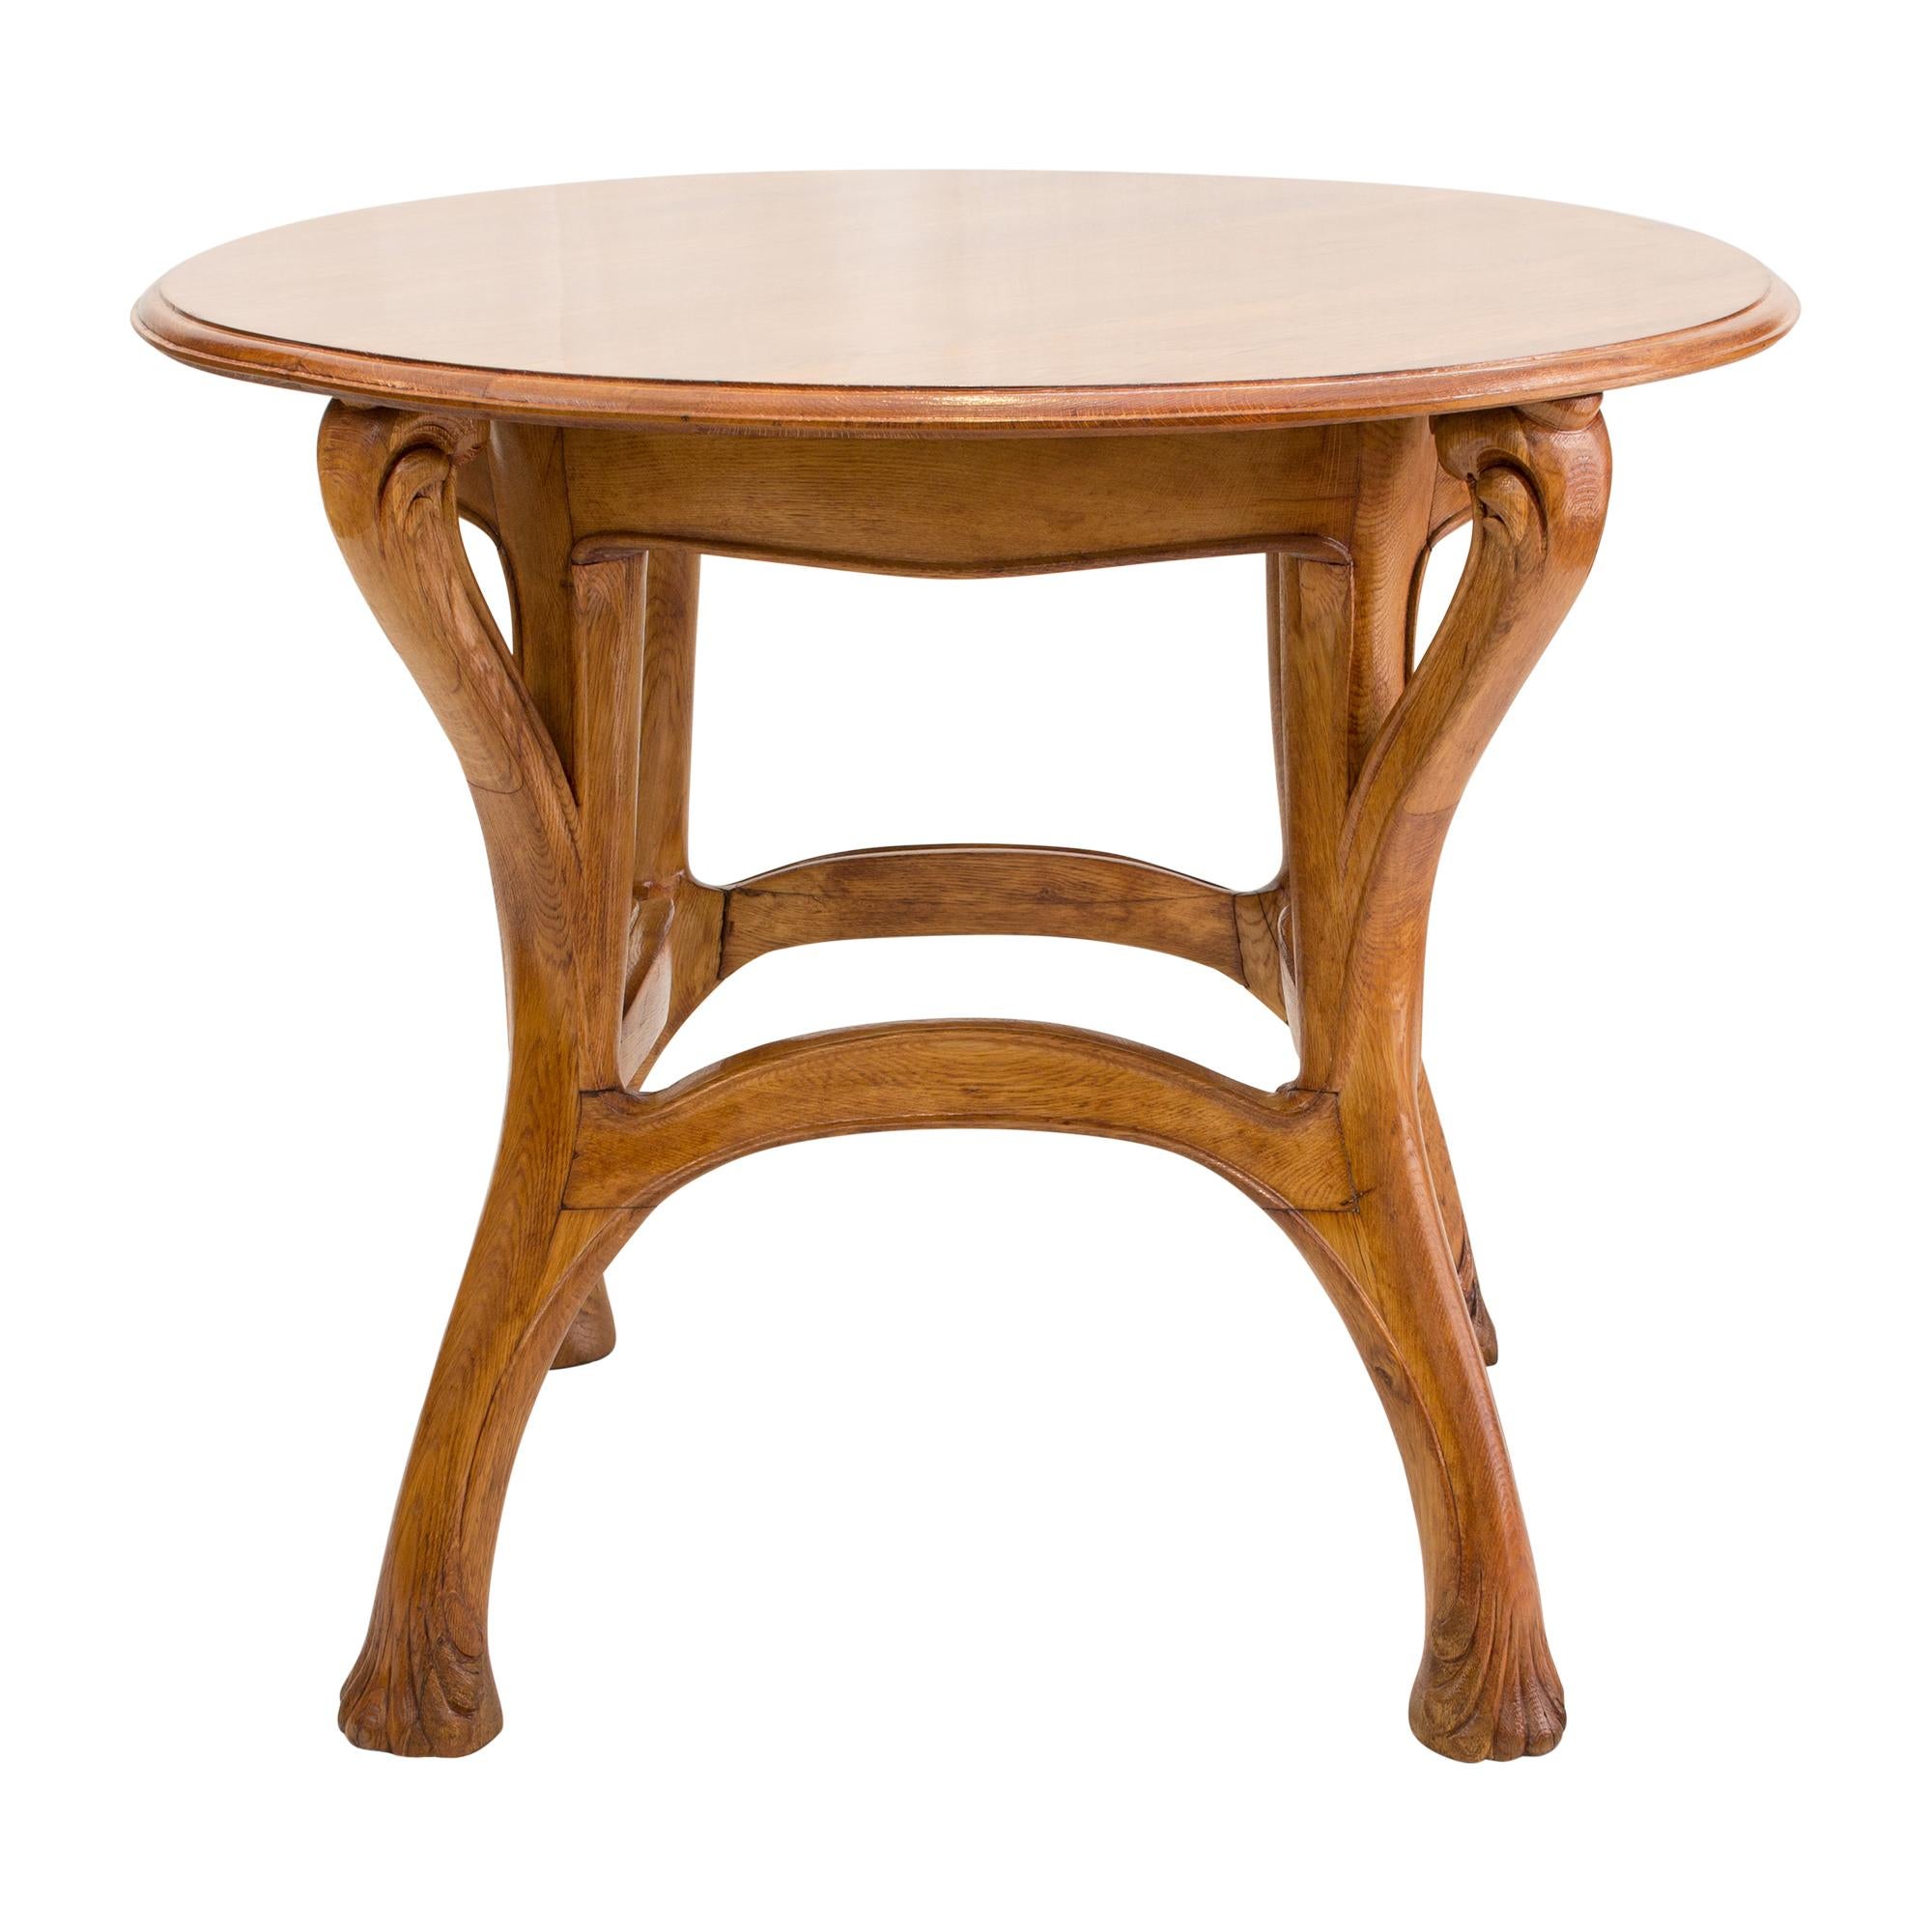 Round table from France, made of solid oak. We attribute the table to Louis Majorelle, or at least to his school in Nancy or to a student, because the double-bearing, outward-curving table legs and the swelling curved bead on the connecting frame,